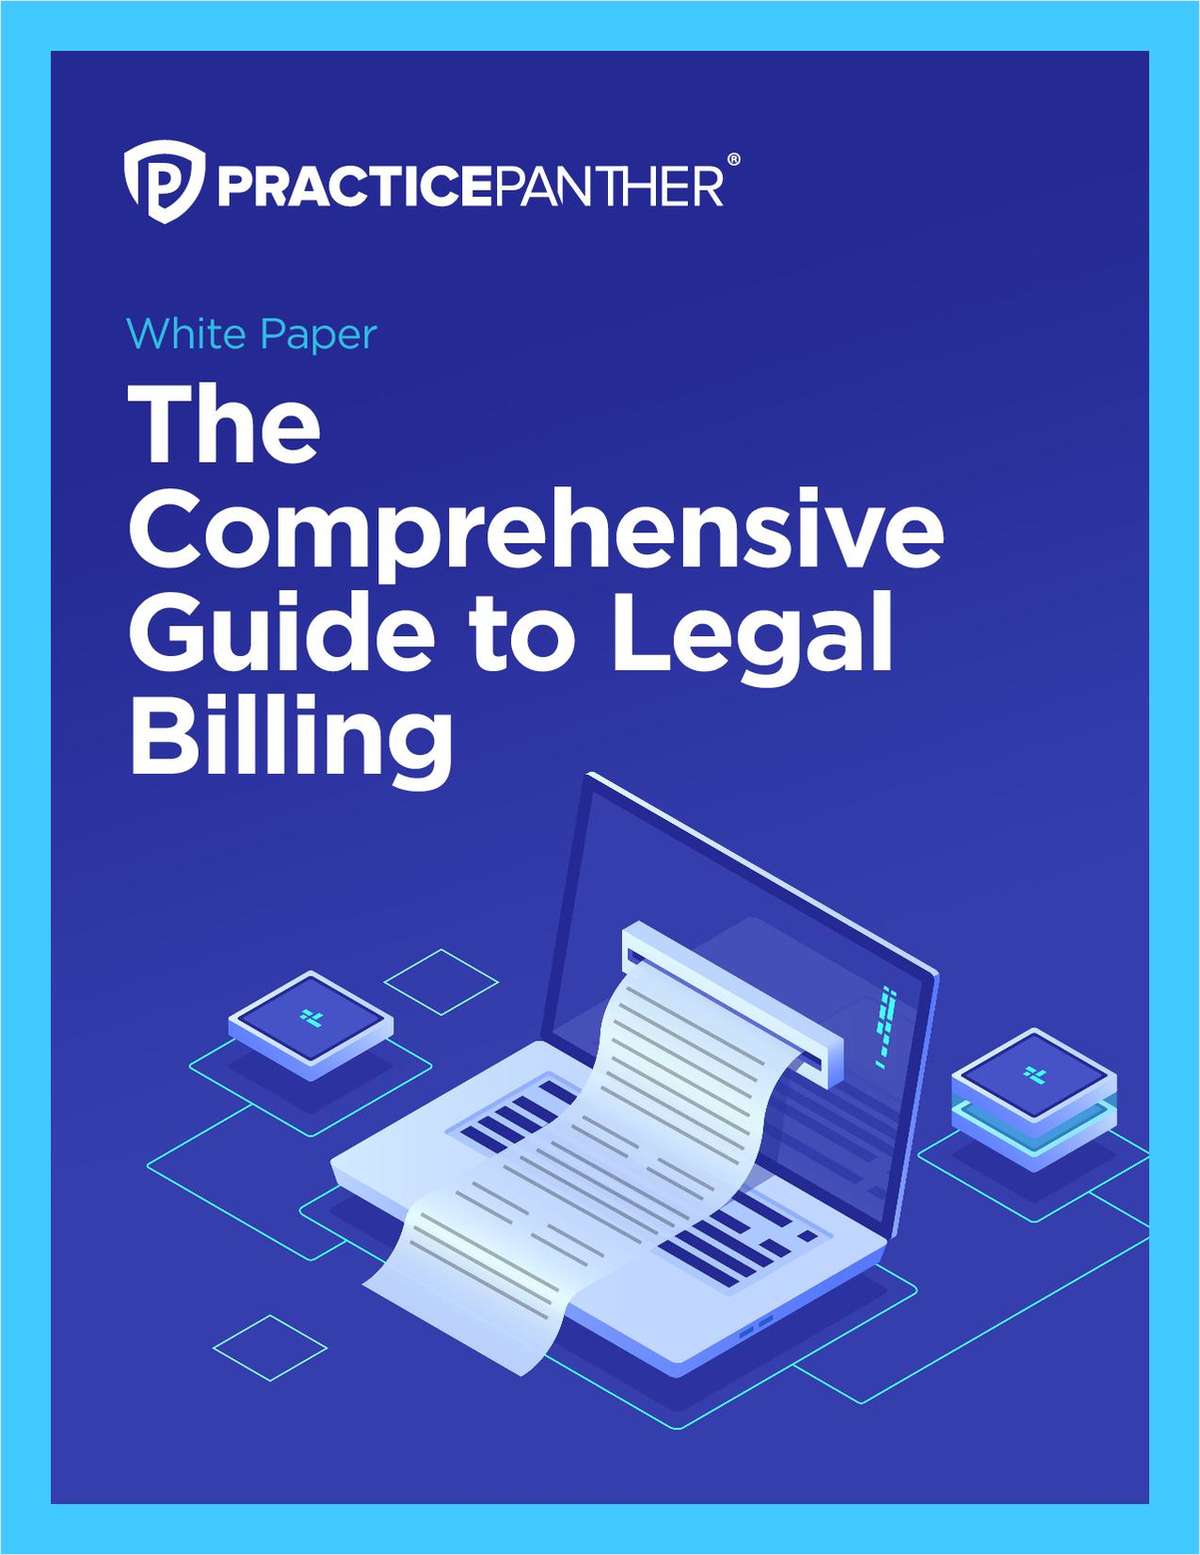 By automating your billing tasks, you’ll be able to leave the office at the end of the day trusting that all your billable hours and payments are accounted for. Download this guide to learn how you can remove yourself from the day-to-day minutia of running your law firm, and gain hours for strategizing and growing your business.